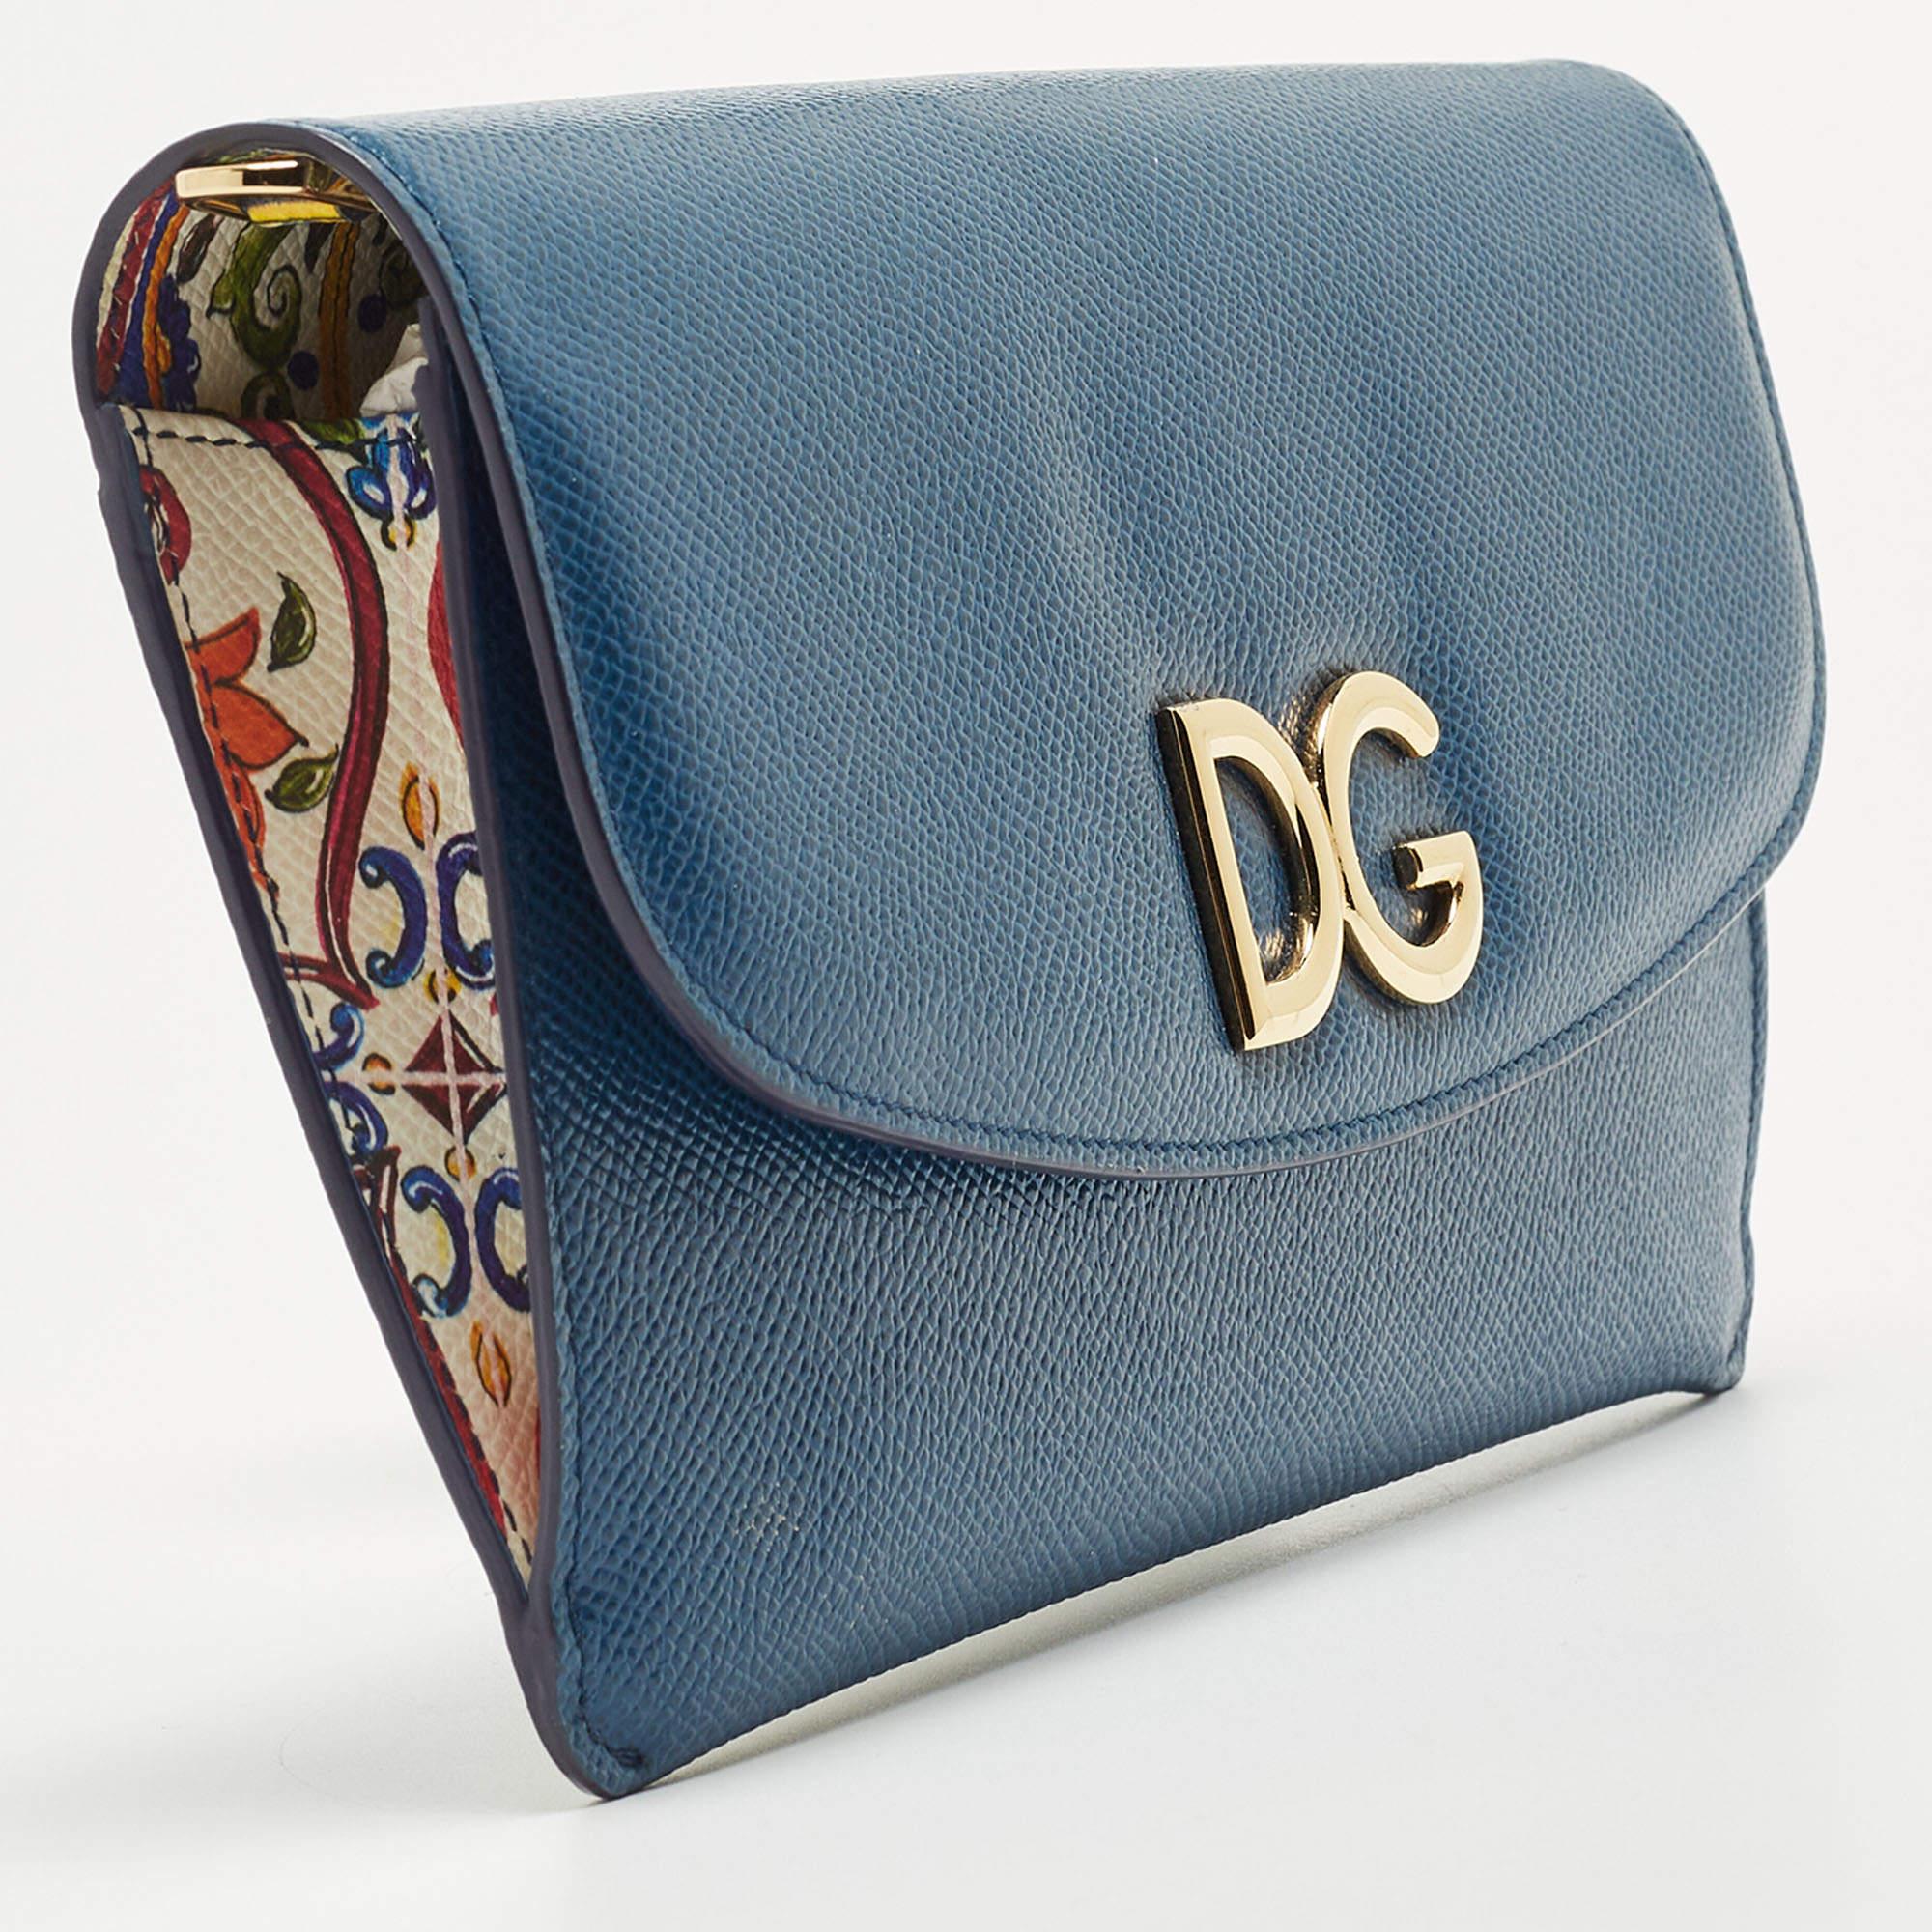 This designer clutch is a creation marked by excellent craftsmanship and refined style. This flap-style clutch is crafted with skill and impeccably finished to be a luxurious accessory in your hand.

